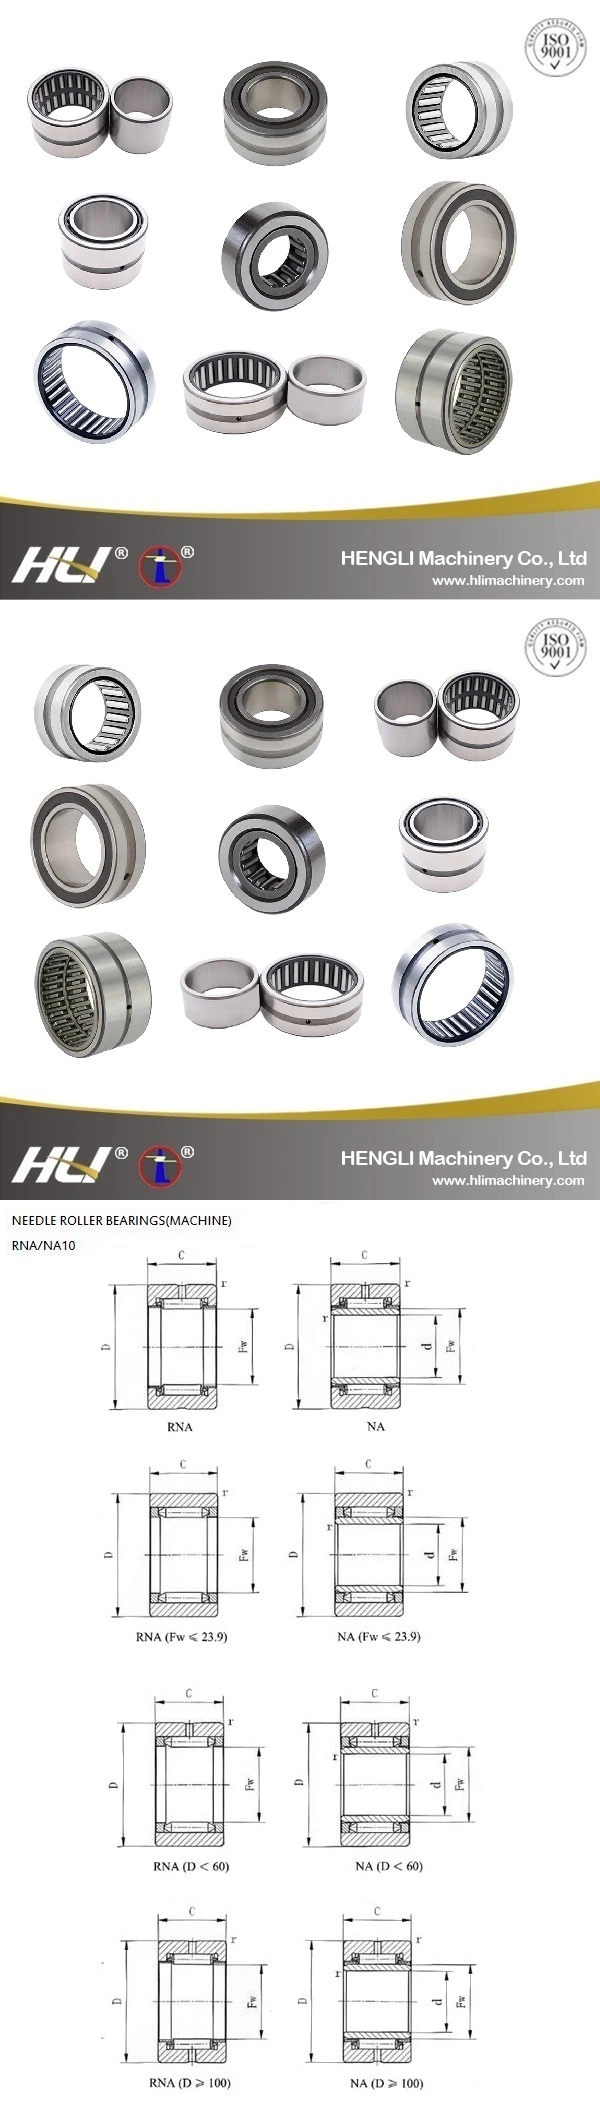 High Precision NA1012/RNA1012 Needle Roller Bearings Used In Compressors